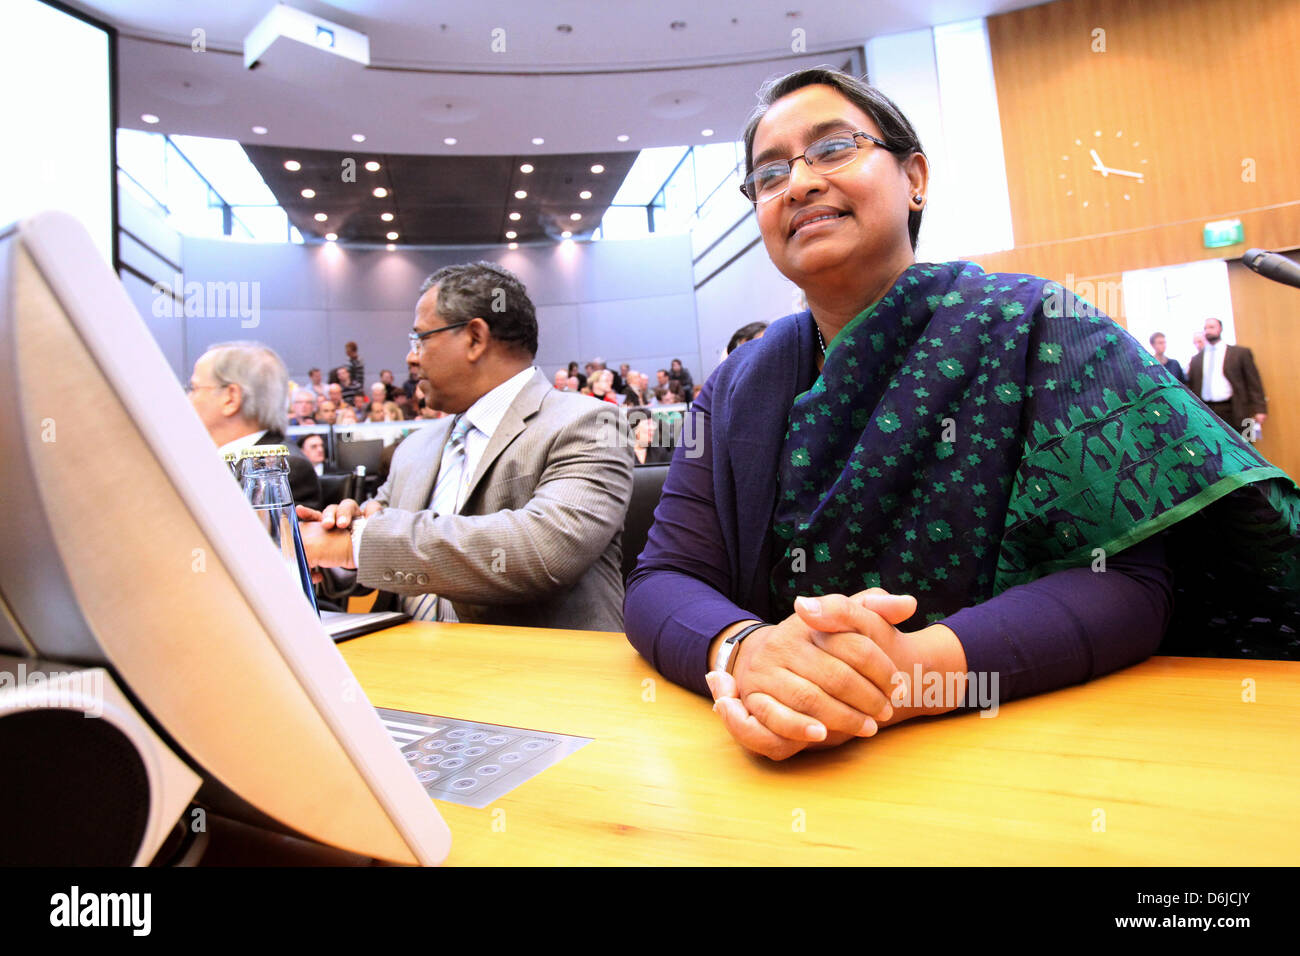 Bangladeshi Foreign Minister Dipu Moni (R) is pictured before the announcement of the verdict in a legal dispute between Burma and Bangladesh at the International Tribunal for the Law of the Sea (ITLOS) in Hamburg, Germany, 14 March 2012. The court had to settle a dispute over a maritime boundary between Burma and Bangladesh. Photo: BODO MARKS Stock Photo